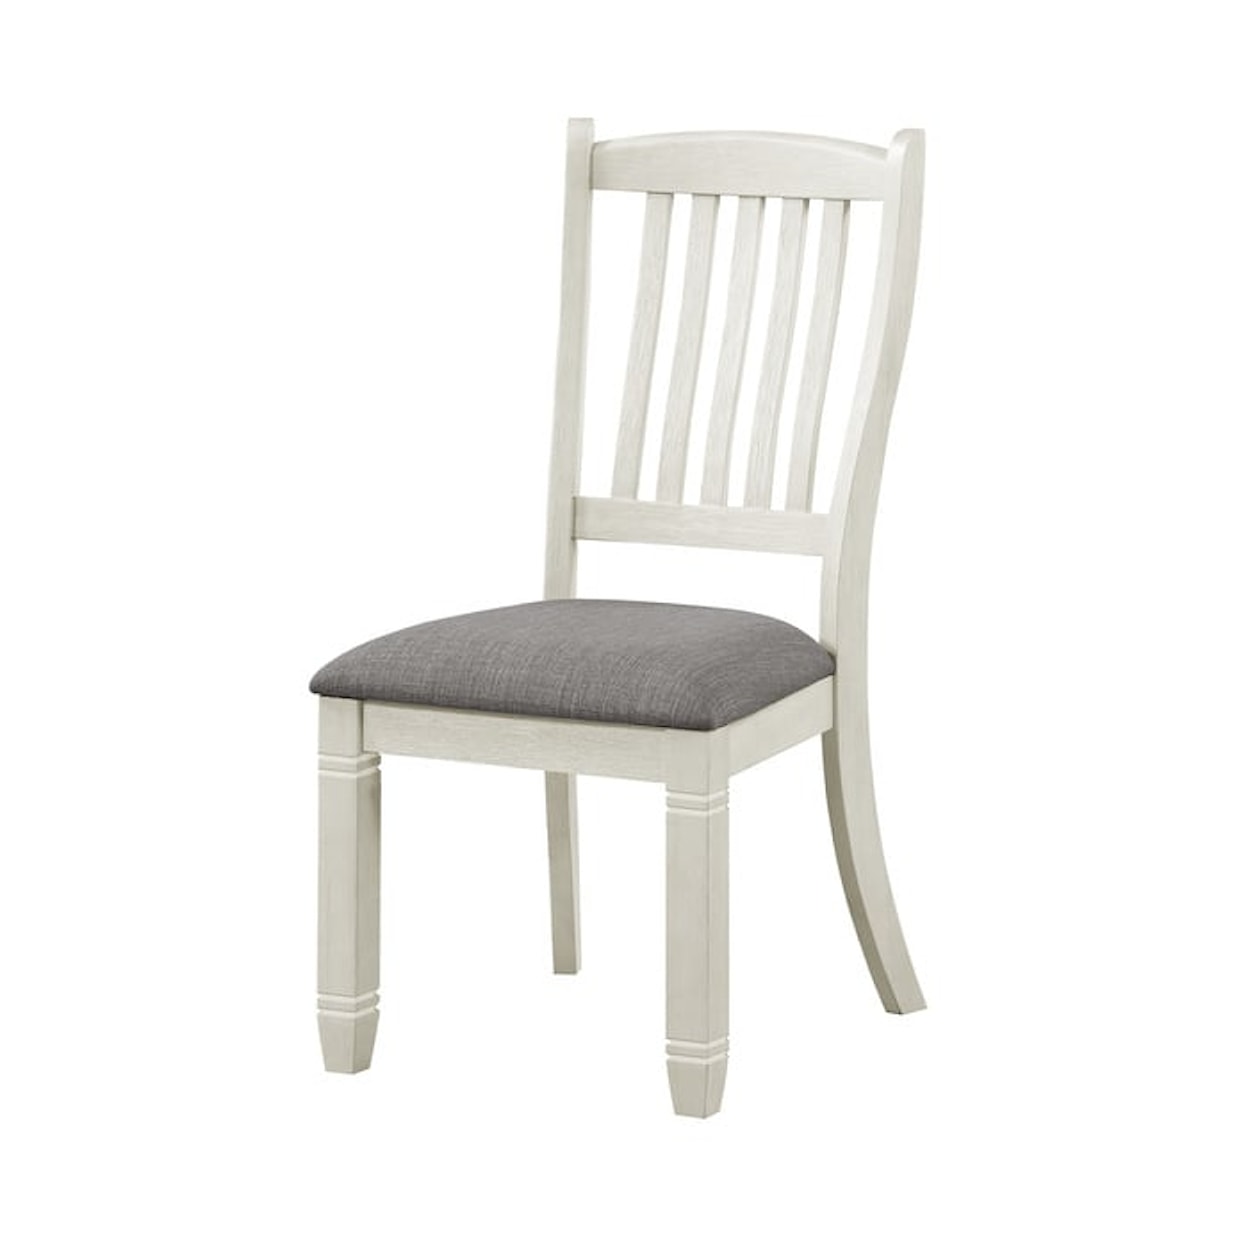 Homelegance Furniture Granby Dining Chair